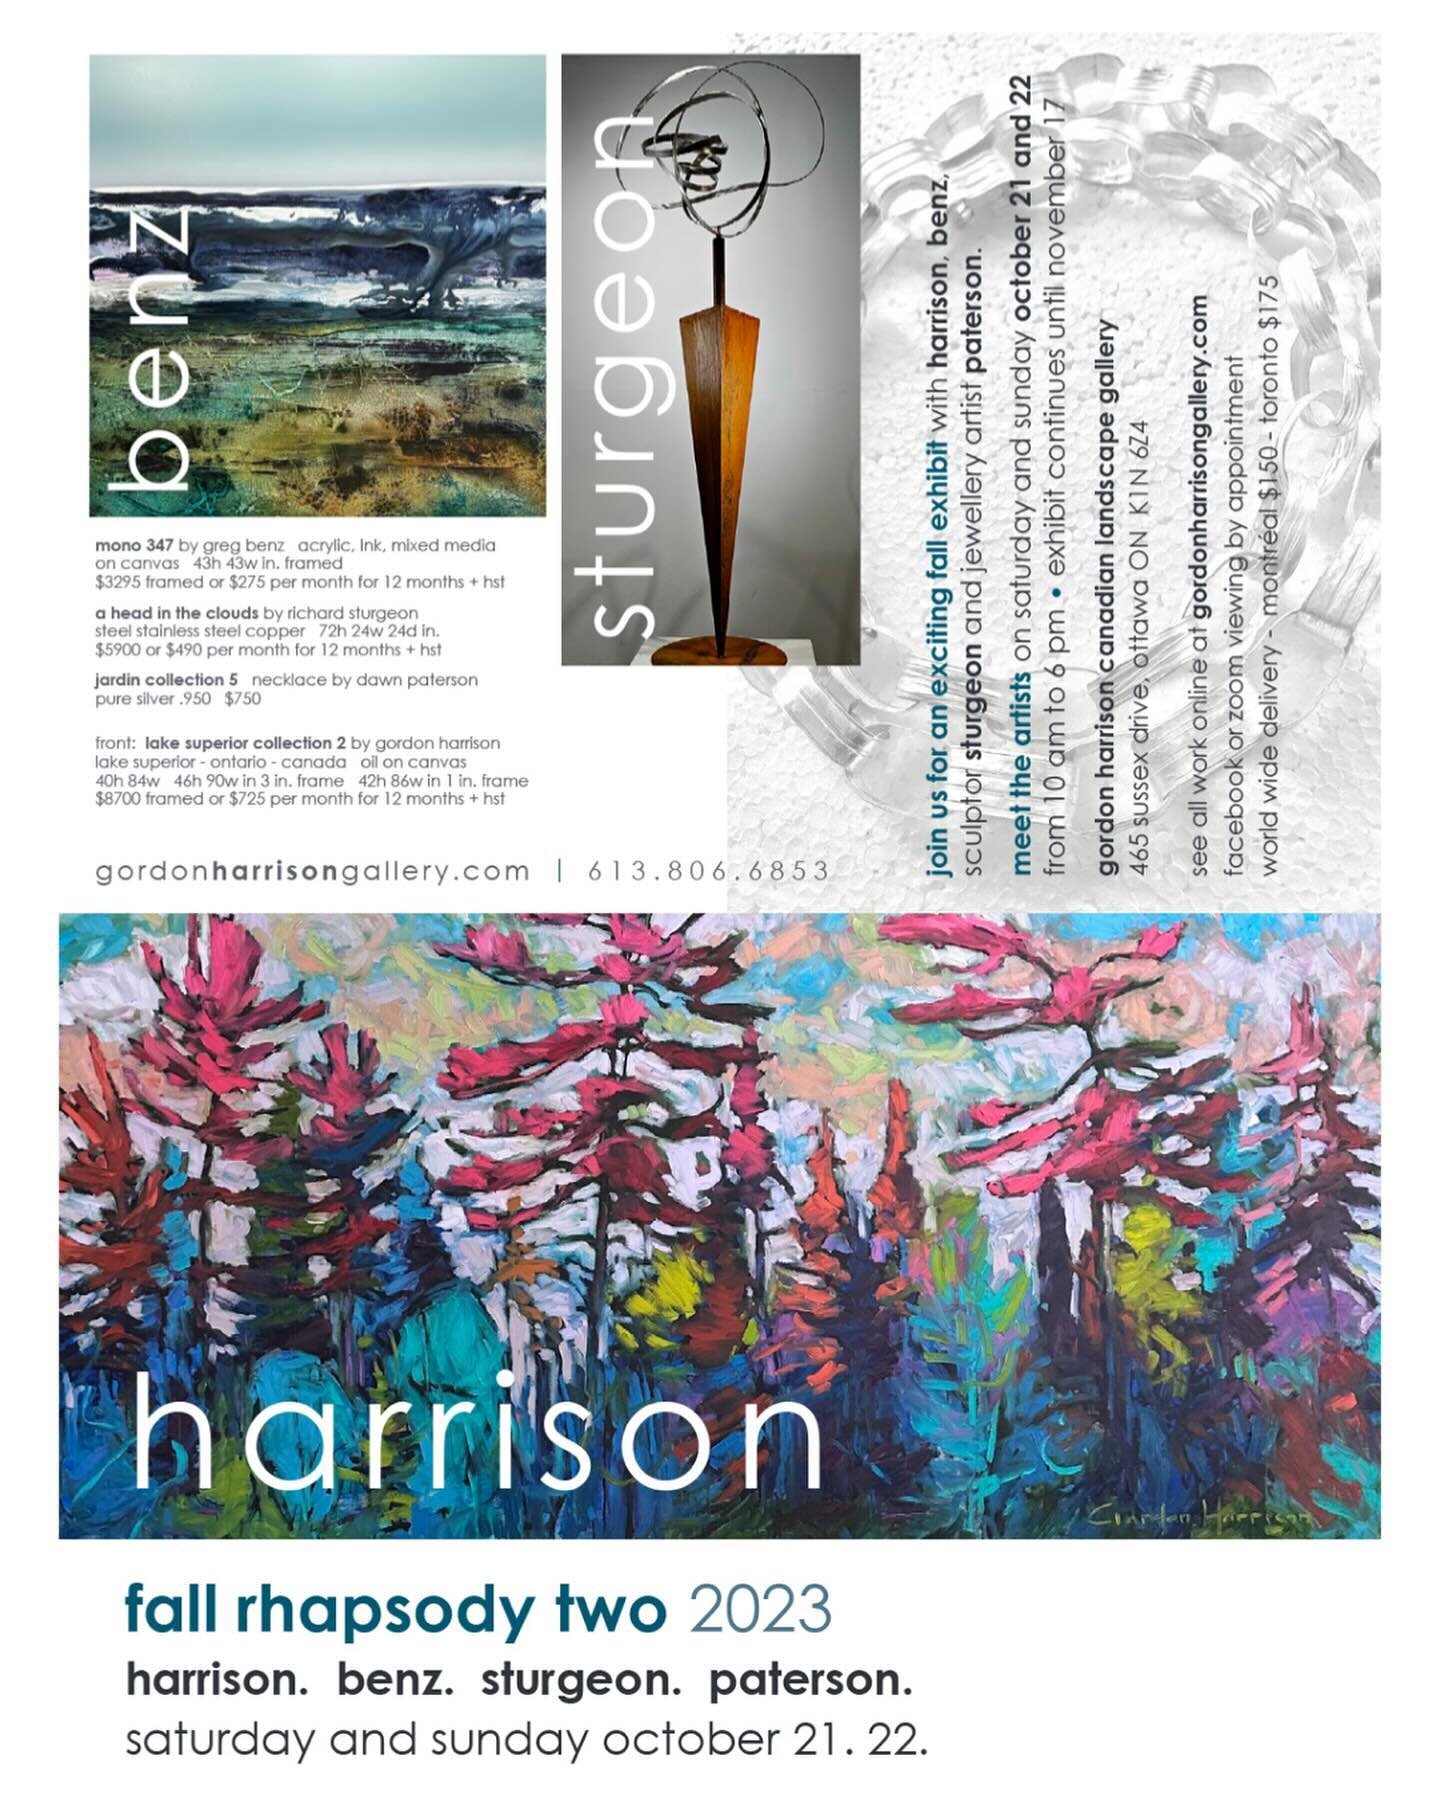 💥Coming up next weekend💥
@gordonharrisongallery in Ottawa.

 I&rsquo;m thrilled to be headed back to Ottawa and the Gordon Harrison Gallery with @richard.sturgeon.sculptor next weekend, October 21st &amp; 22nd.

All artists will be in attendance Sa